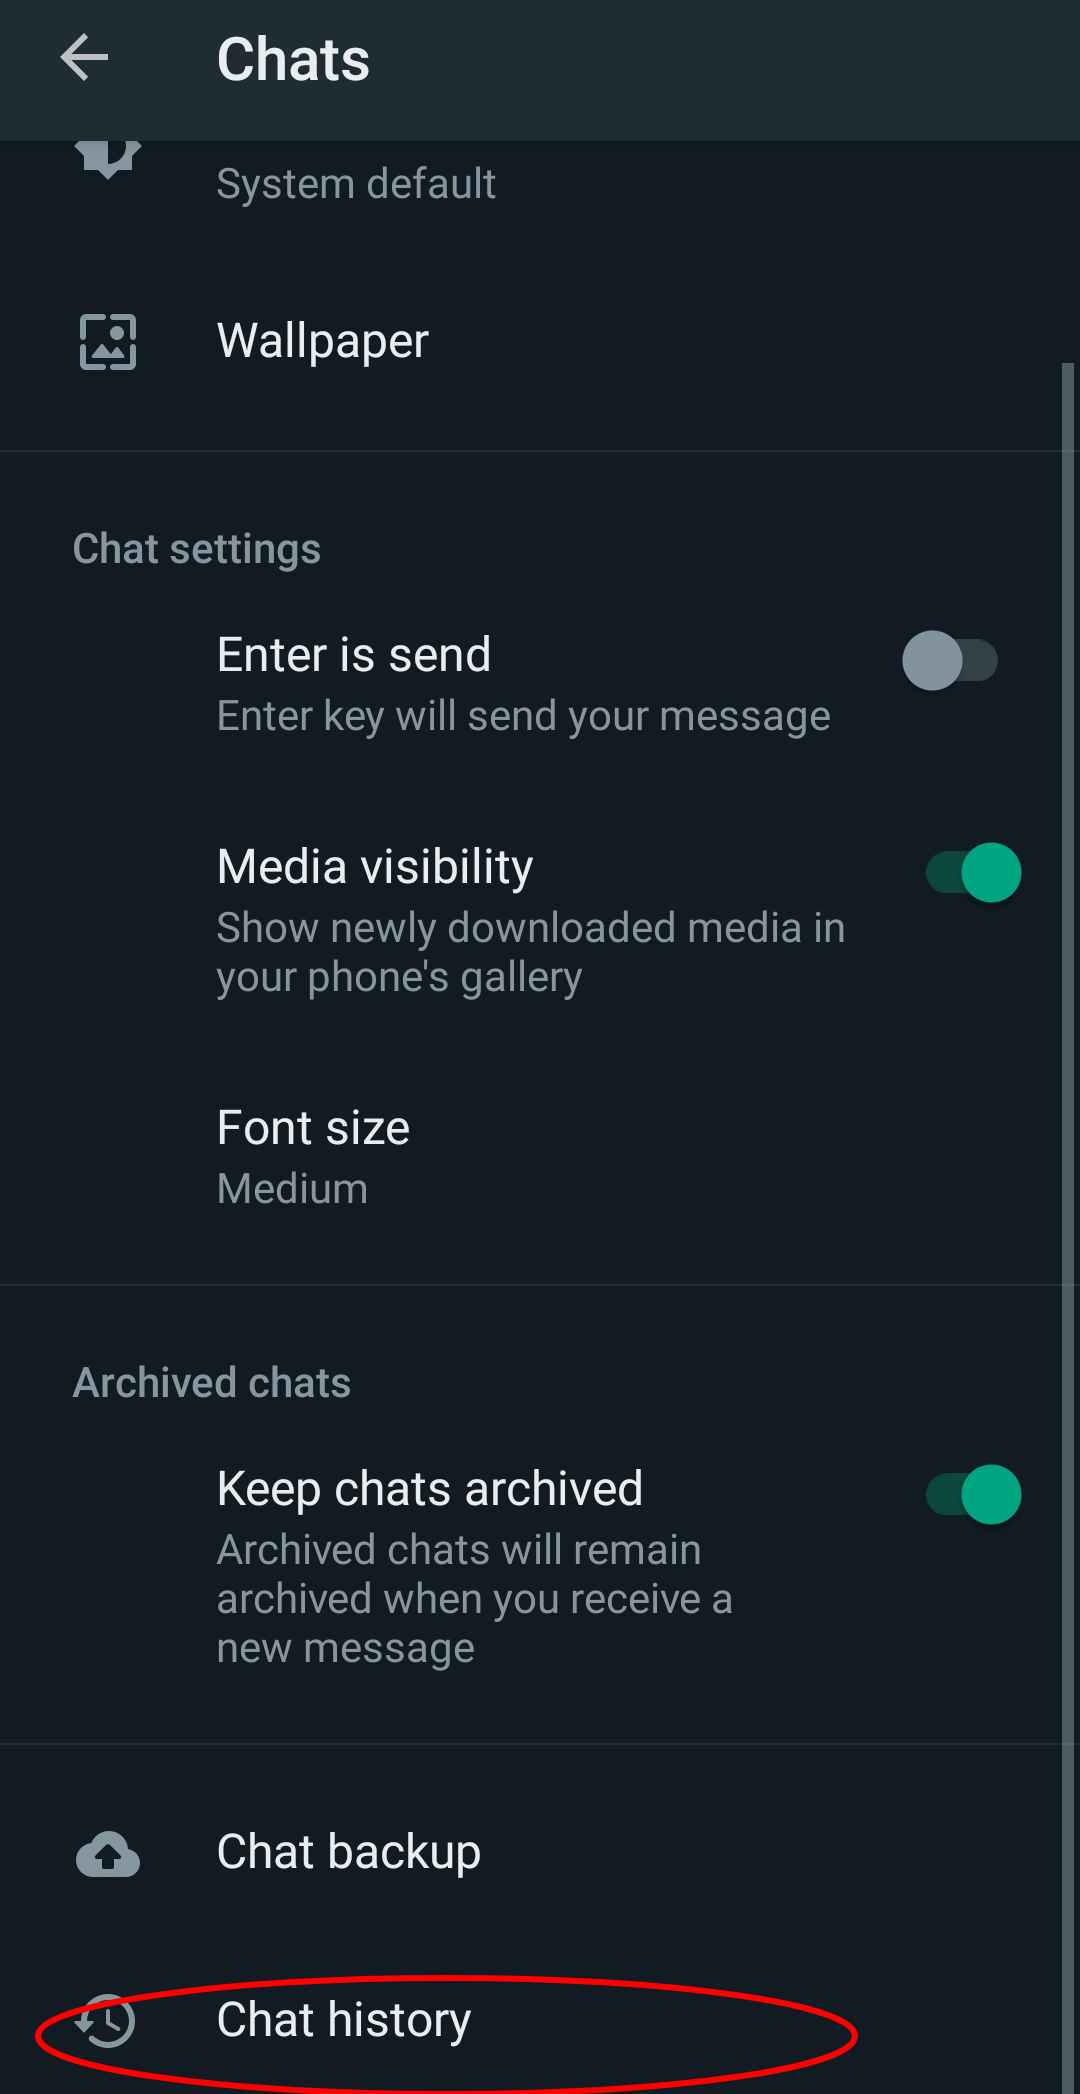 Tap on chat history to export WhatsApp chats